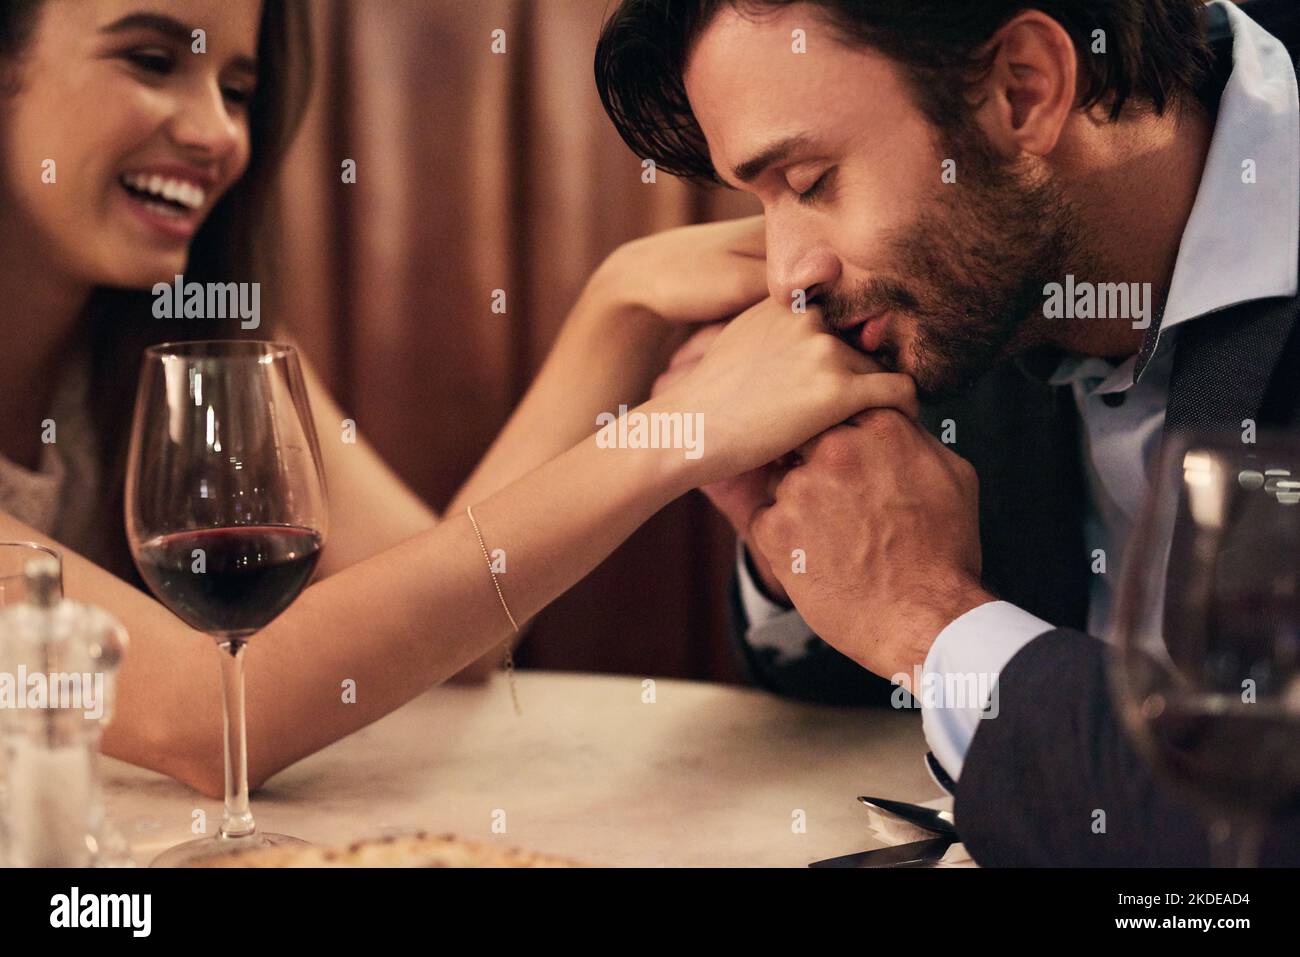 Your hands are so soft...a happy young couple enjoying a romantic dinner date at a restaurant. Stock Photo